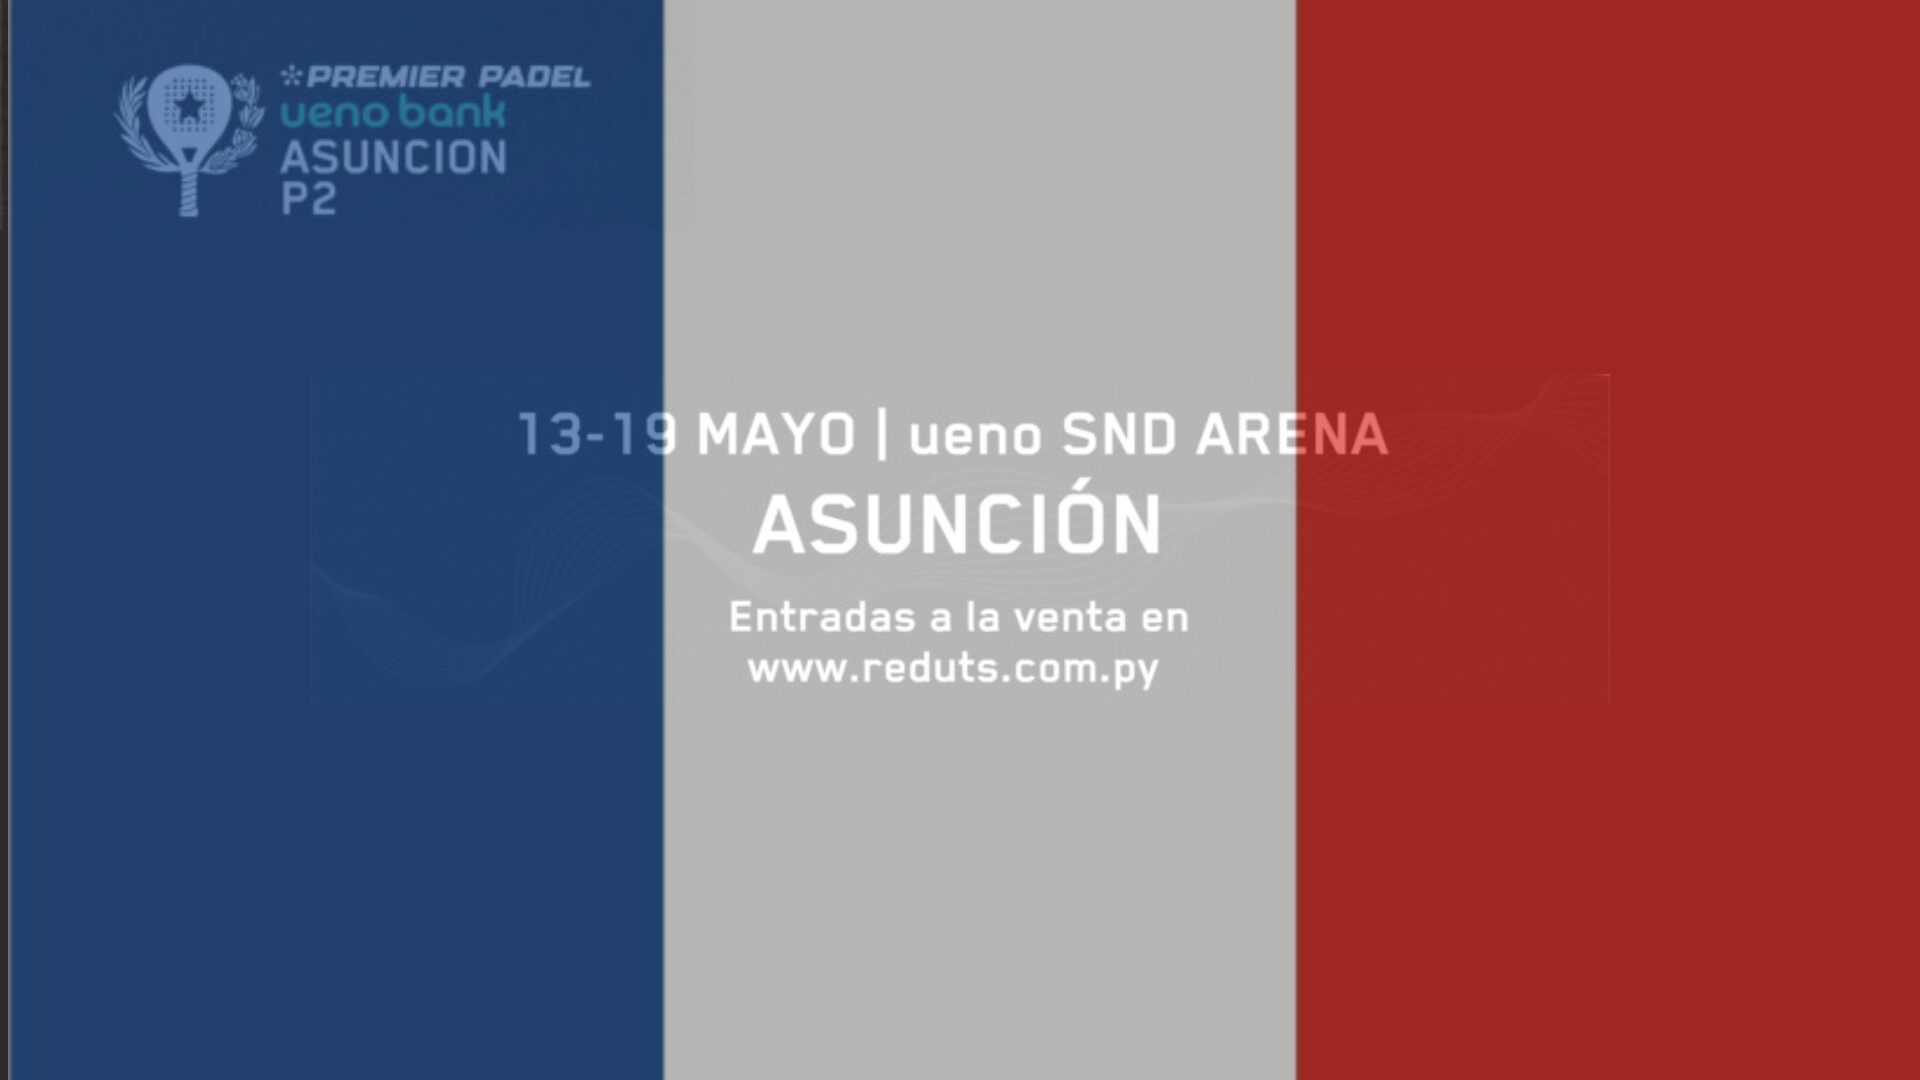 Premier Padel Asuncion P2 – Nine French people will be there!